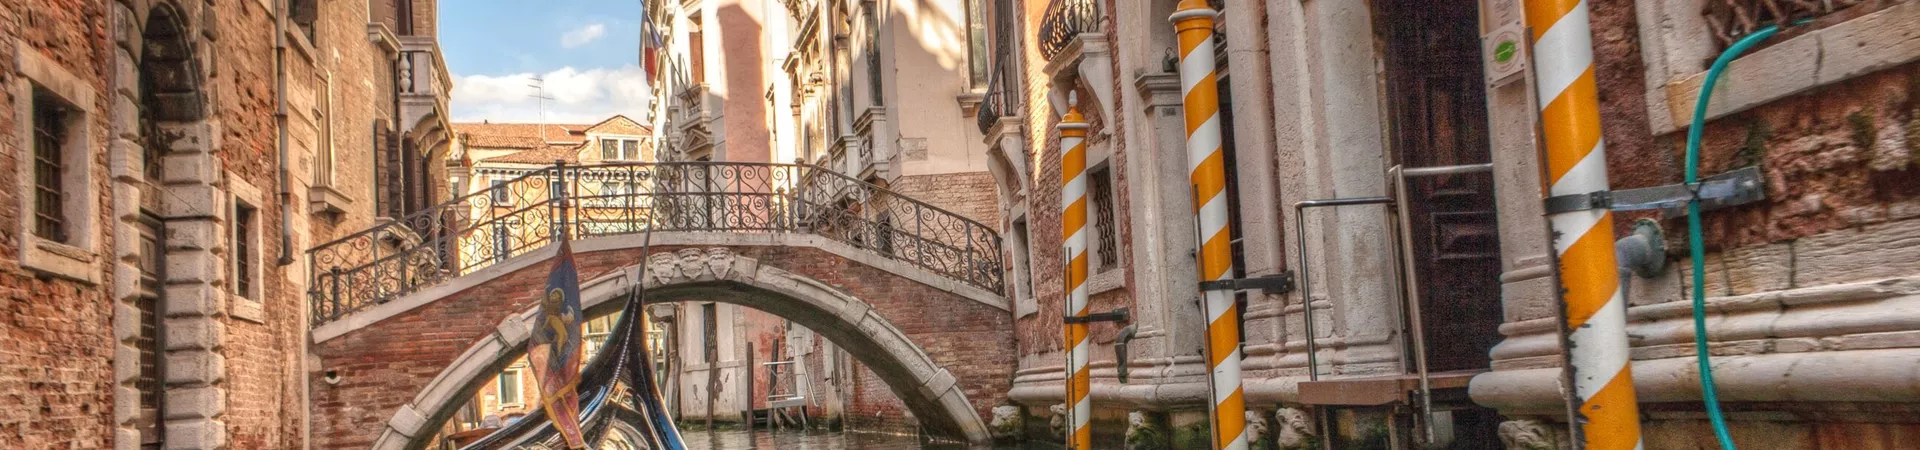 Gondola on a small canal in Venice, Italy